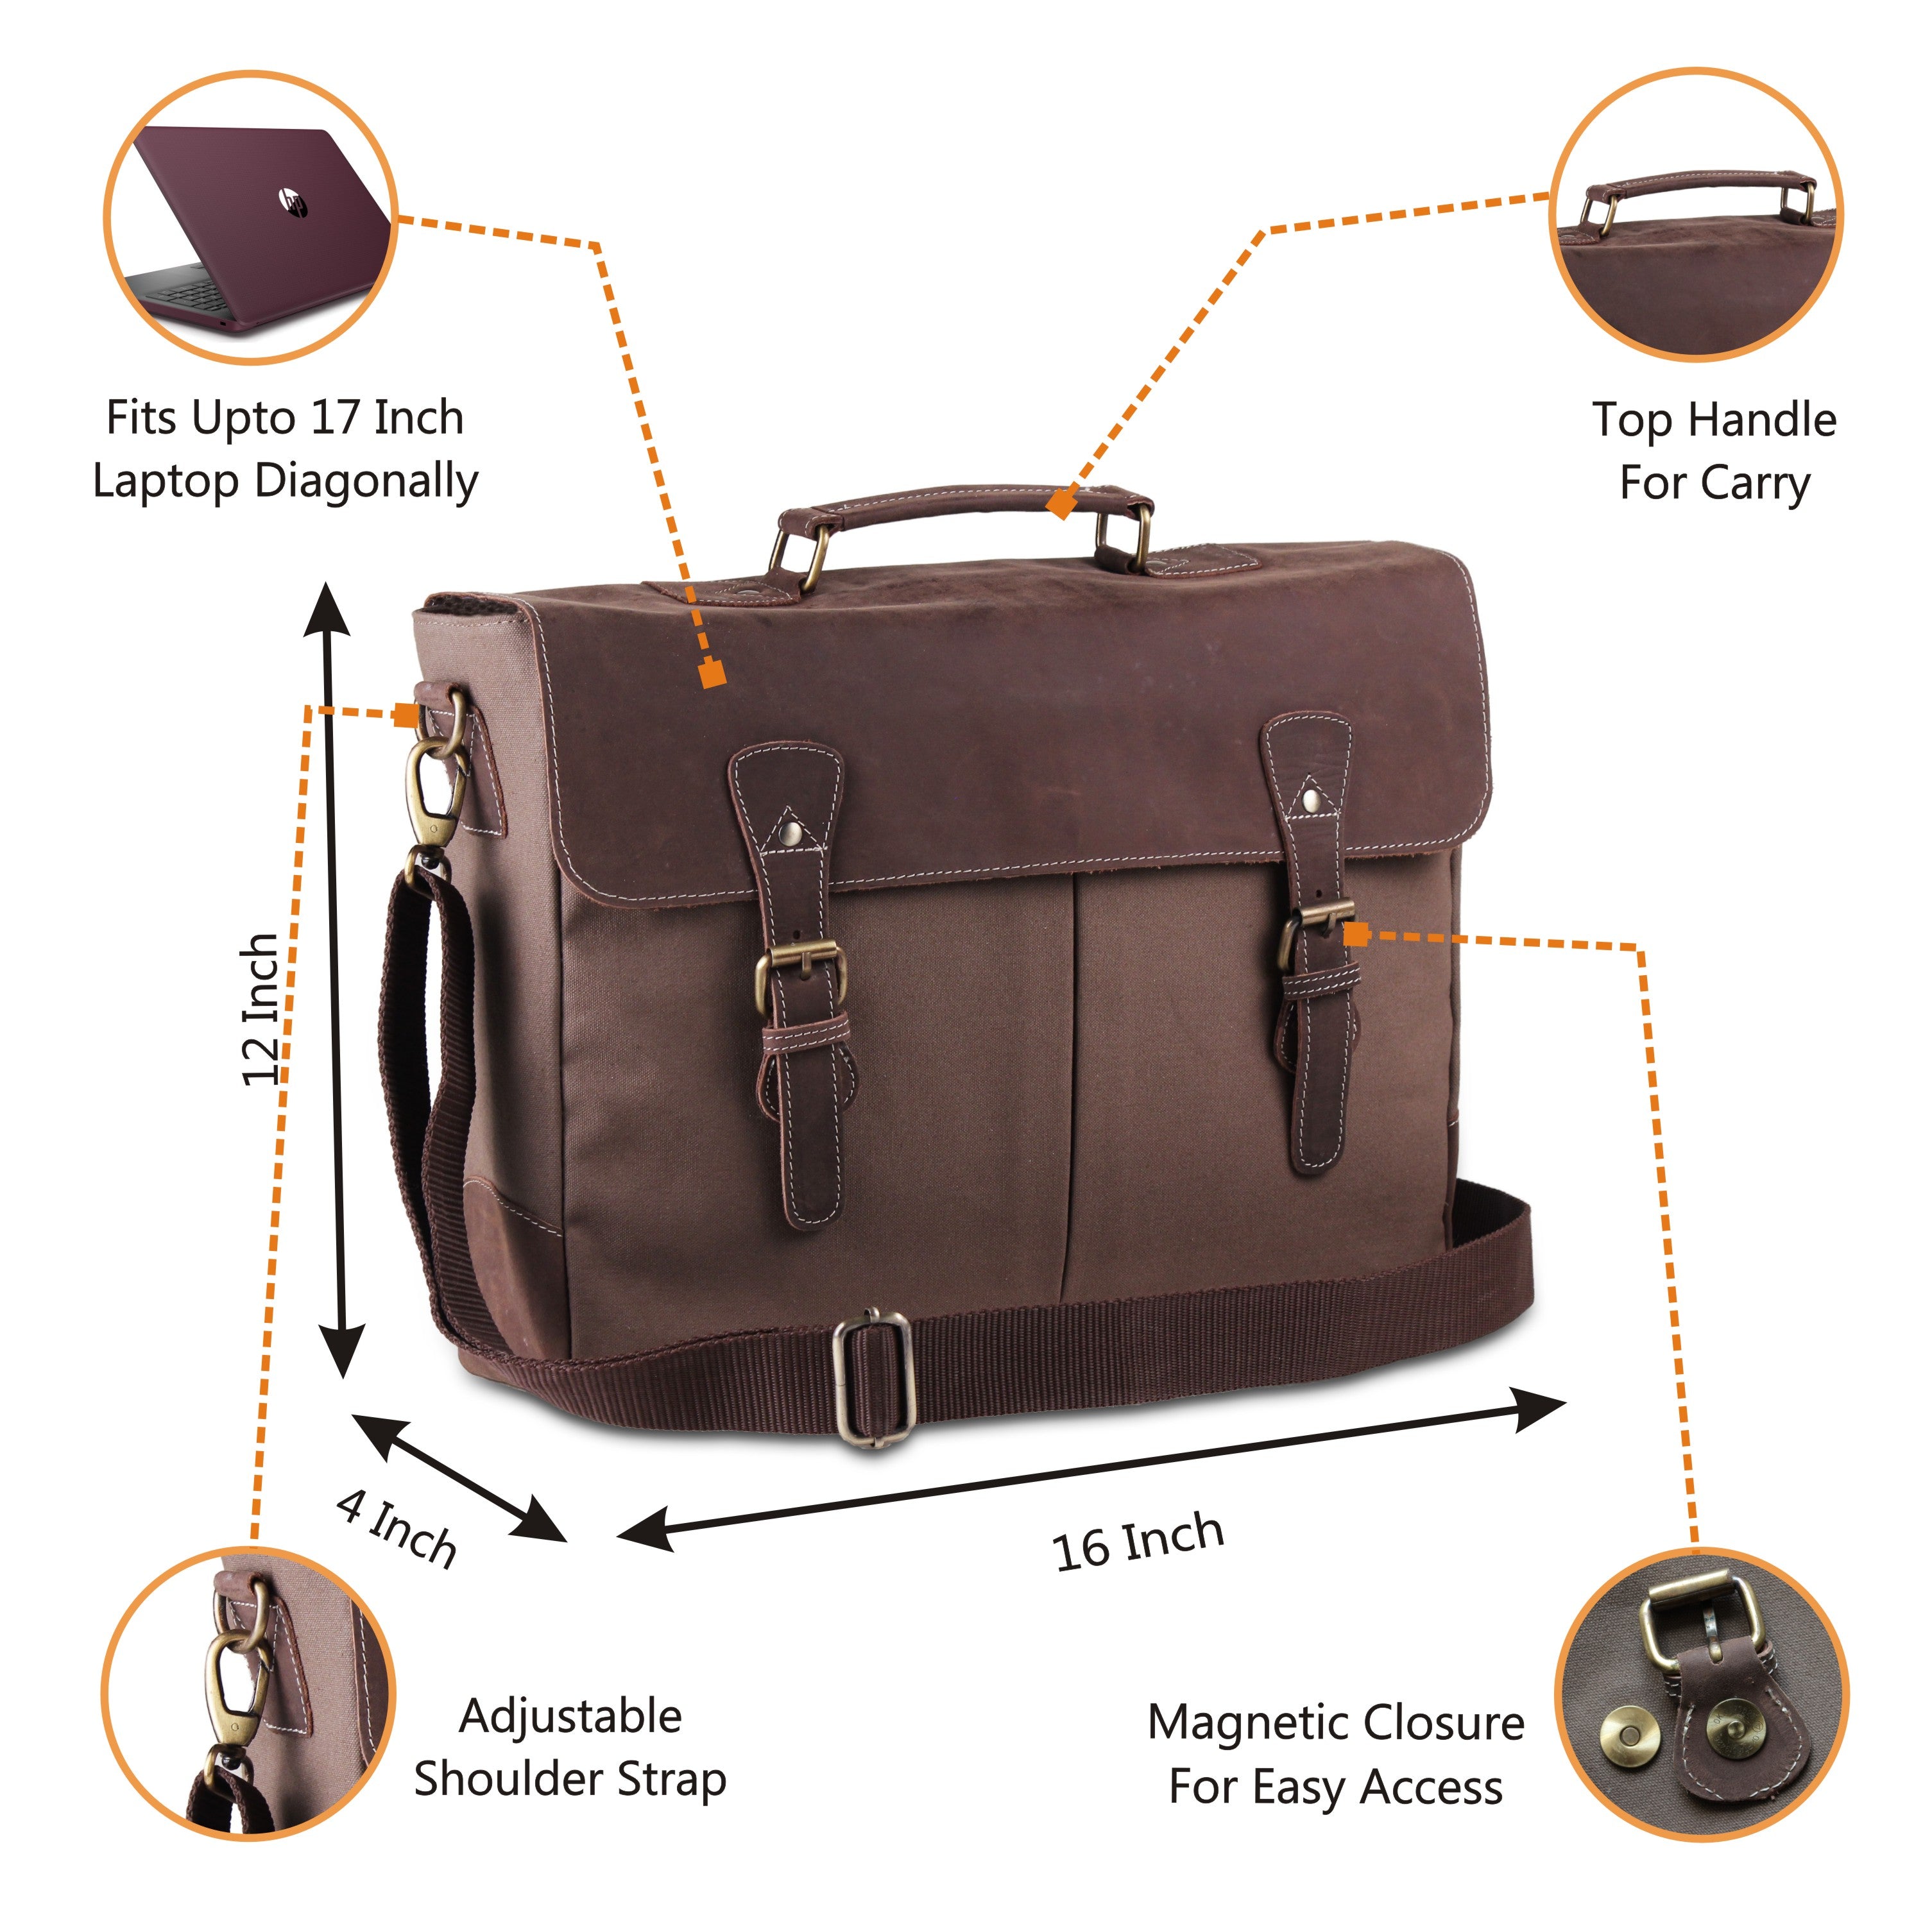 Features of Dark Brown Canvas Leather Messenger Bag with Top Handle and Adjustable Strap